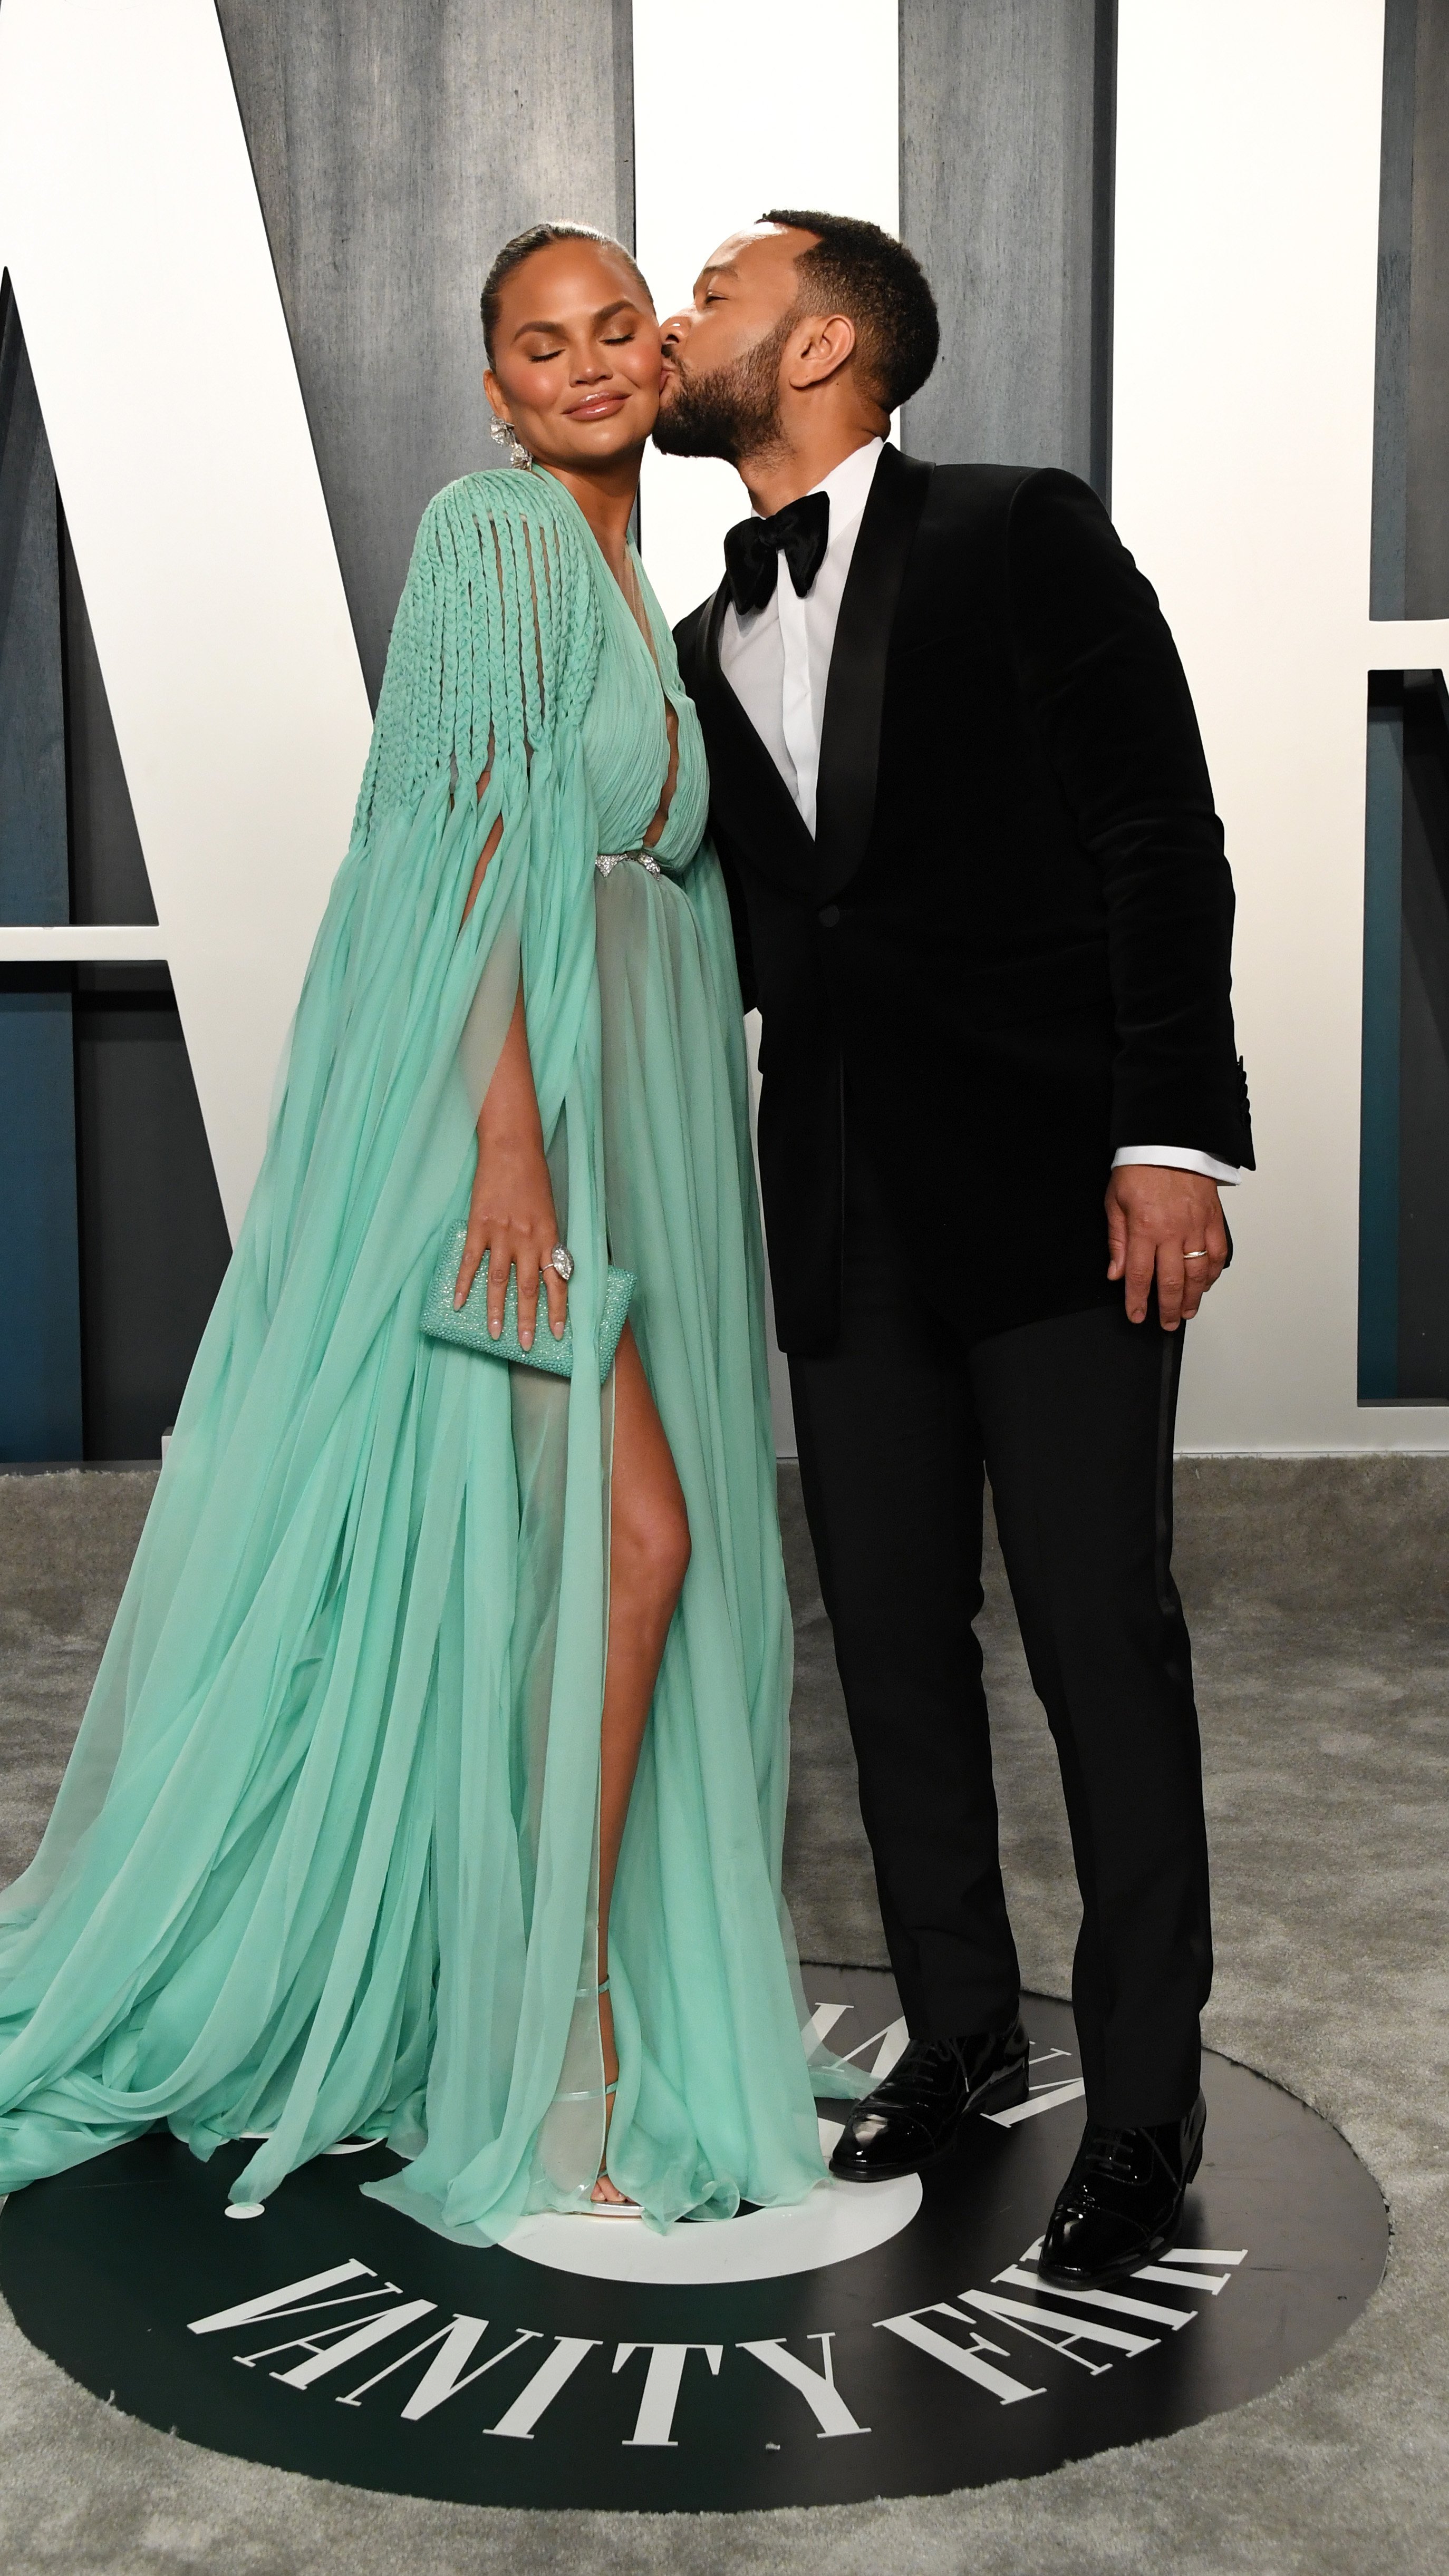 chrissy Teigen and John Legend pictured at 2020 Vanity Fair Oscar Party hosted by Radhika Jones, 2020, California. | Photo: Getty Images